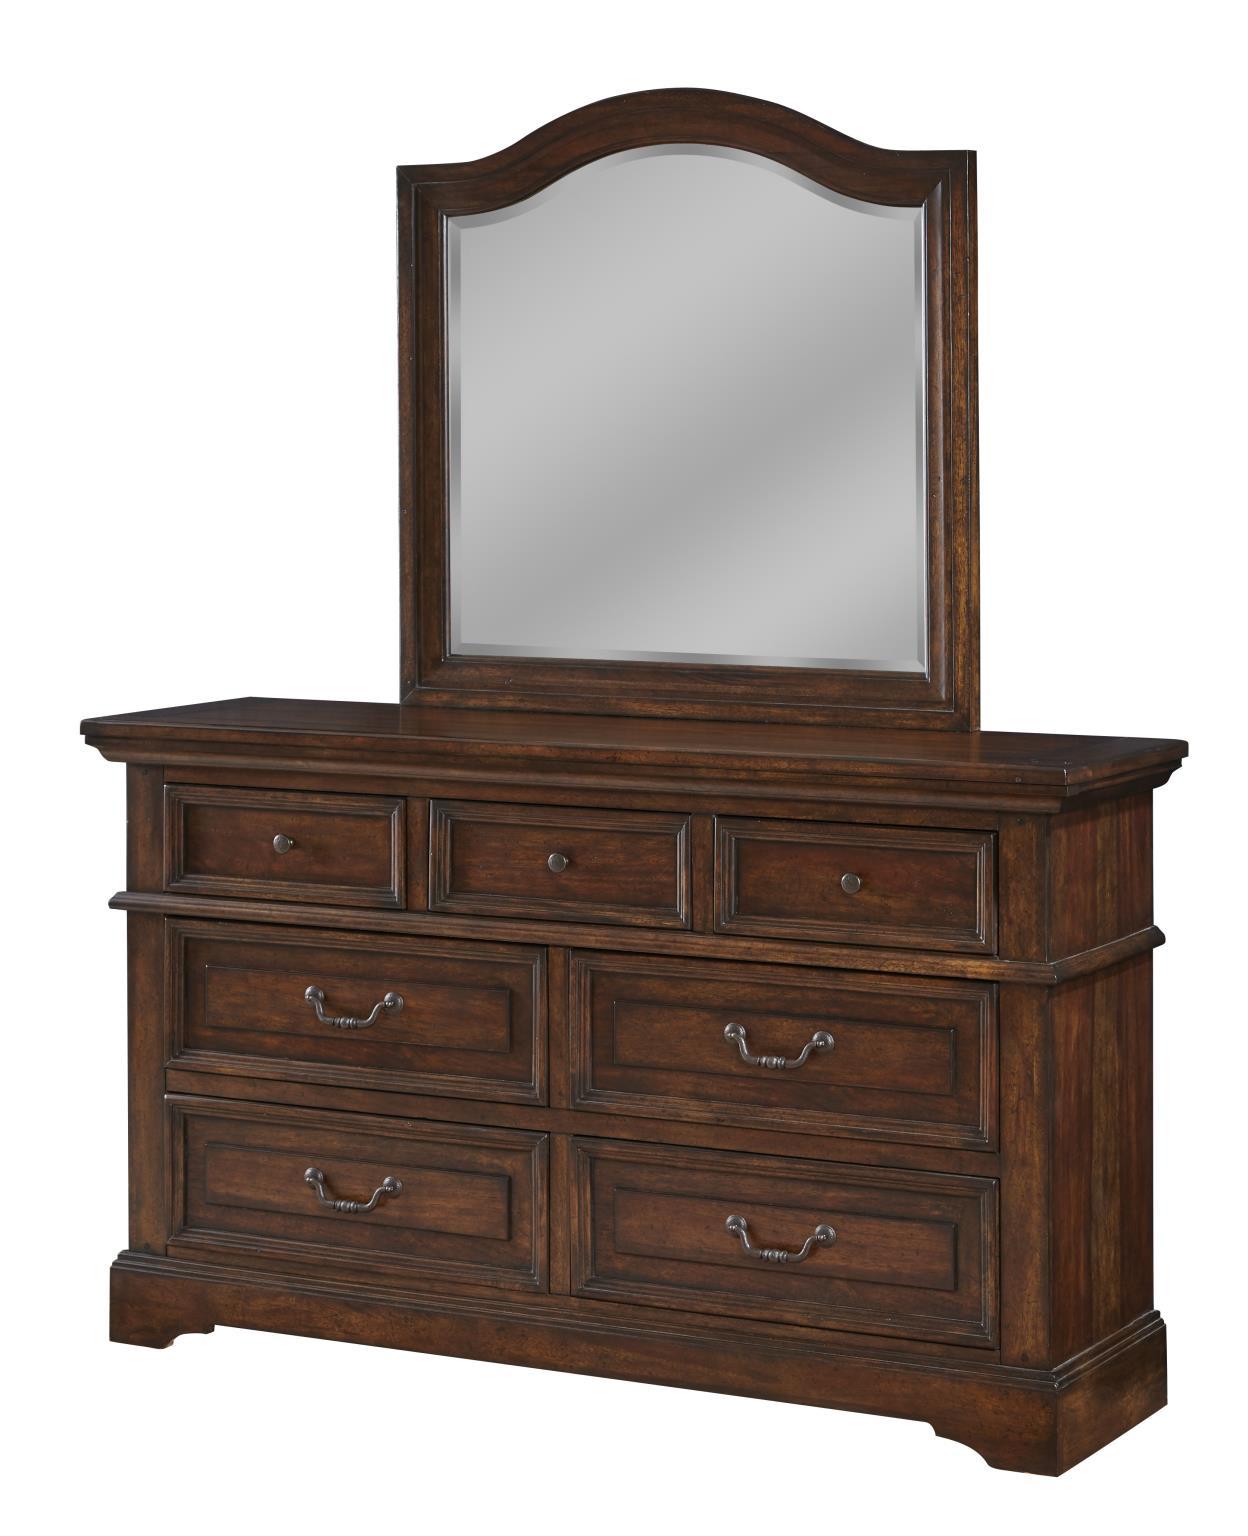 American Woodcrafters 7800 STONEBROOK Dresser With Mirror